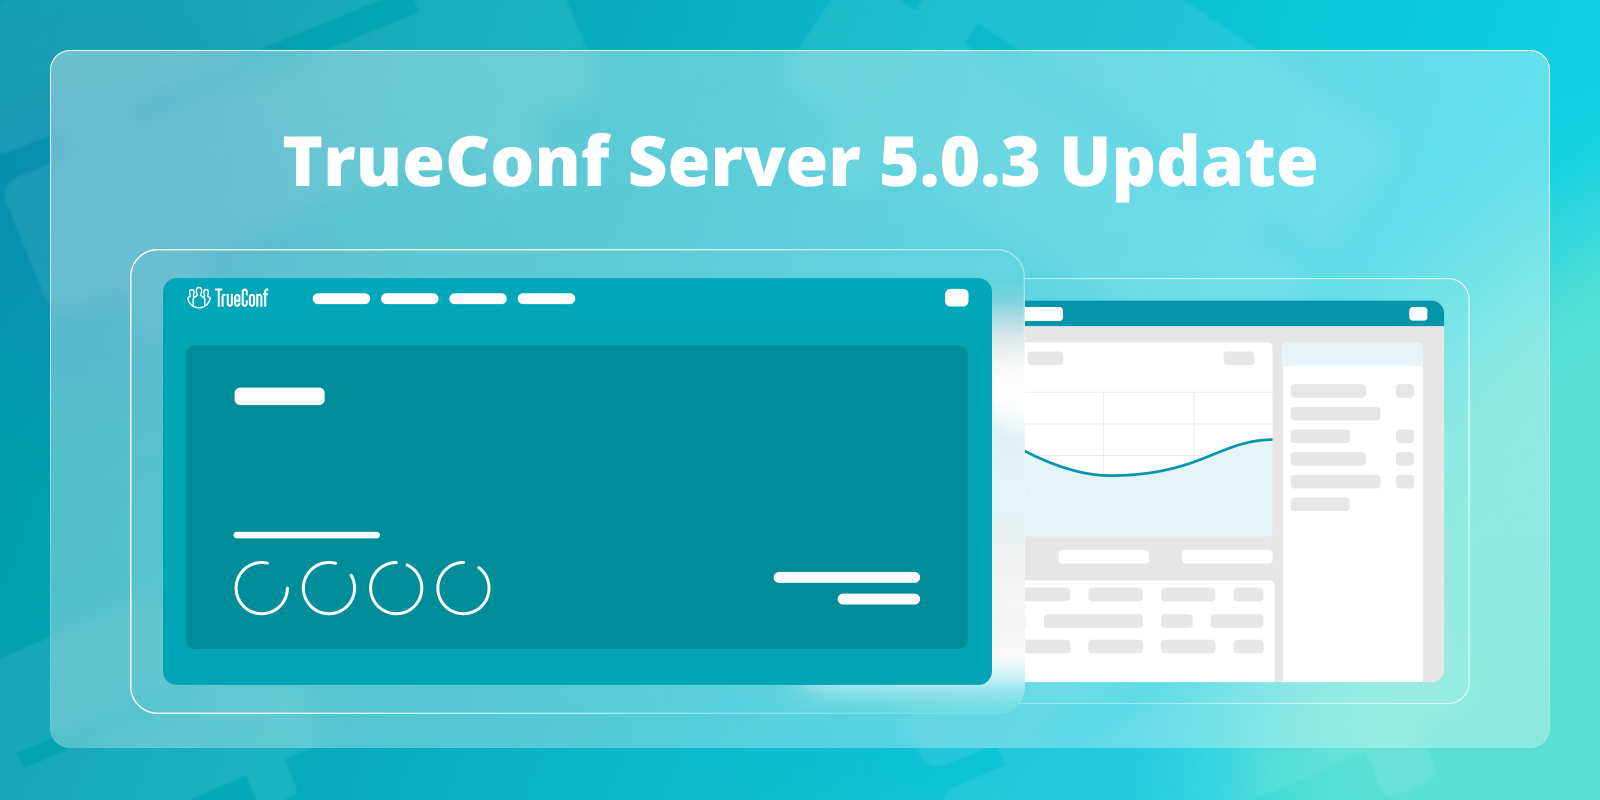 TrueConf Server 5.0.3 Update: Stability and Performance Improvements 1